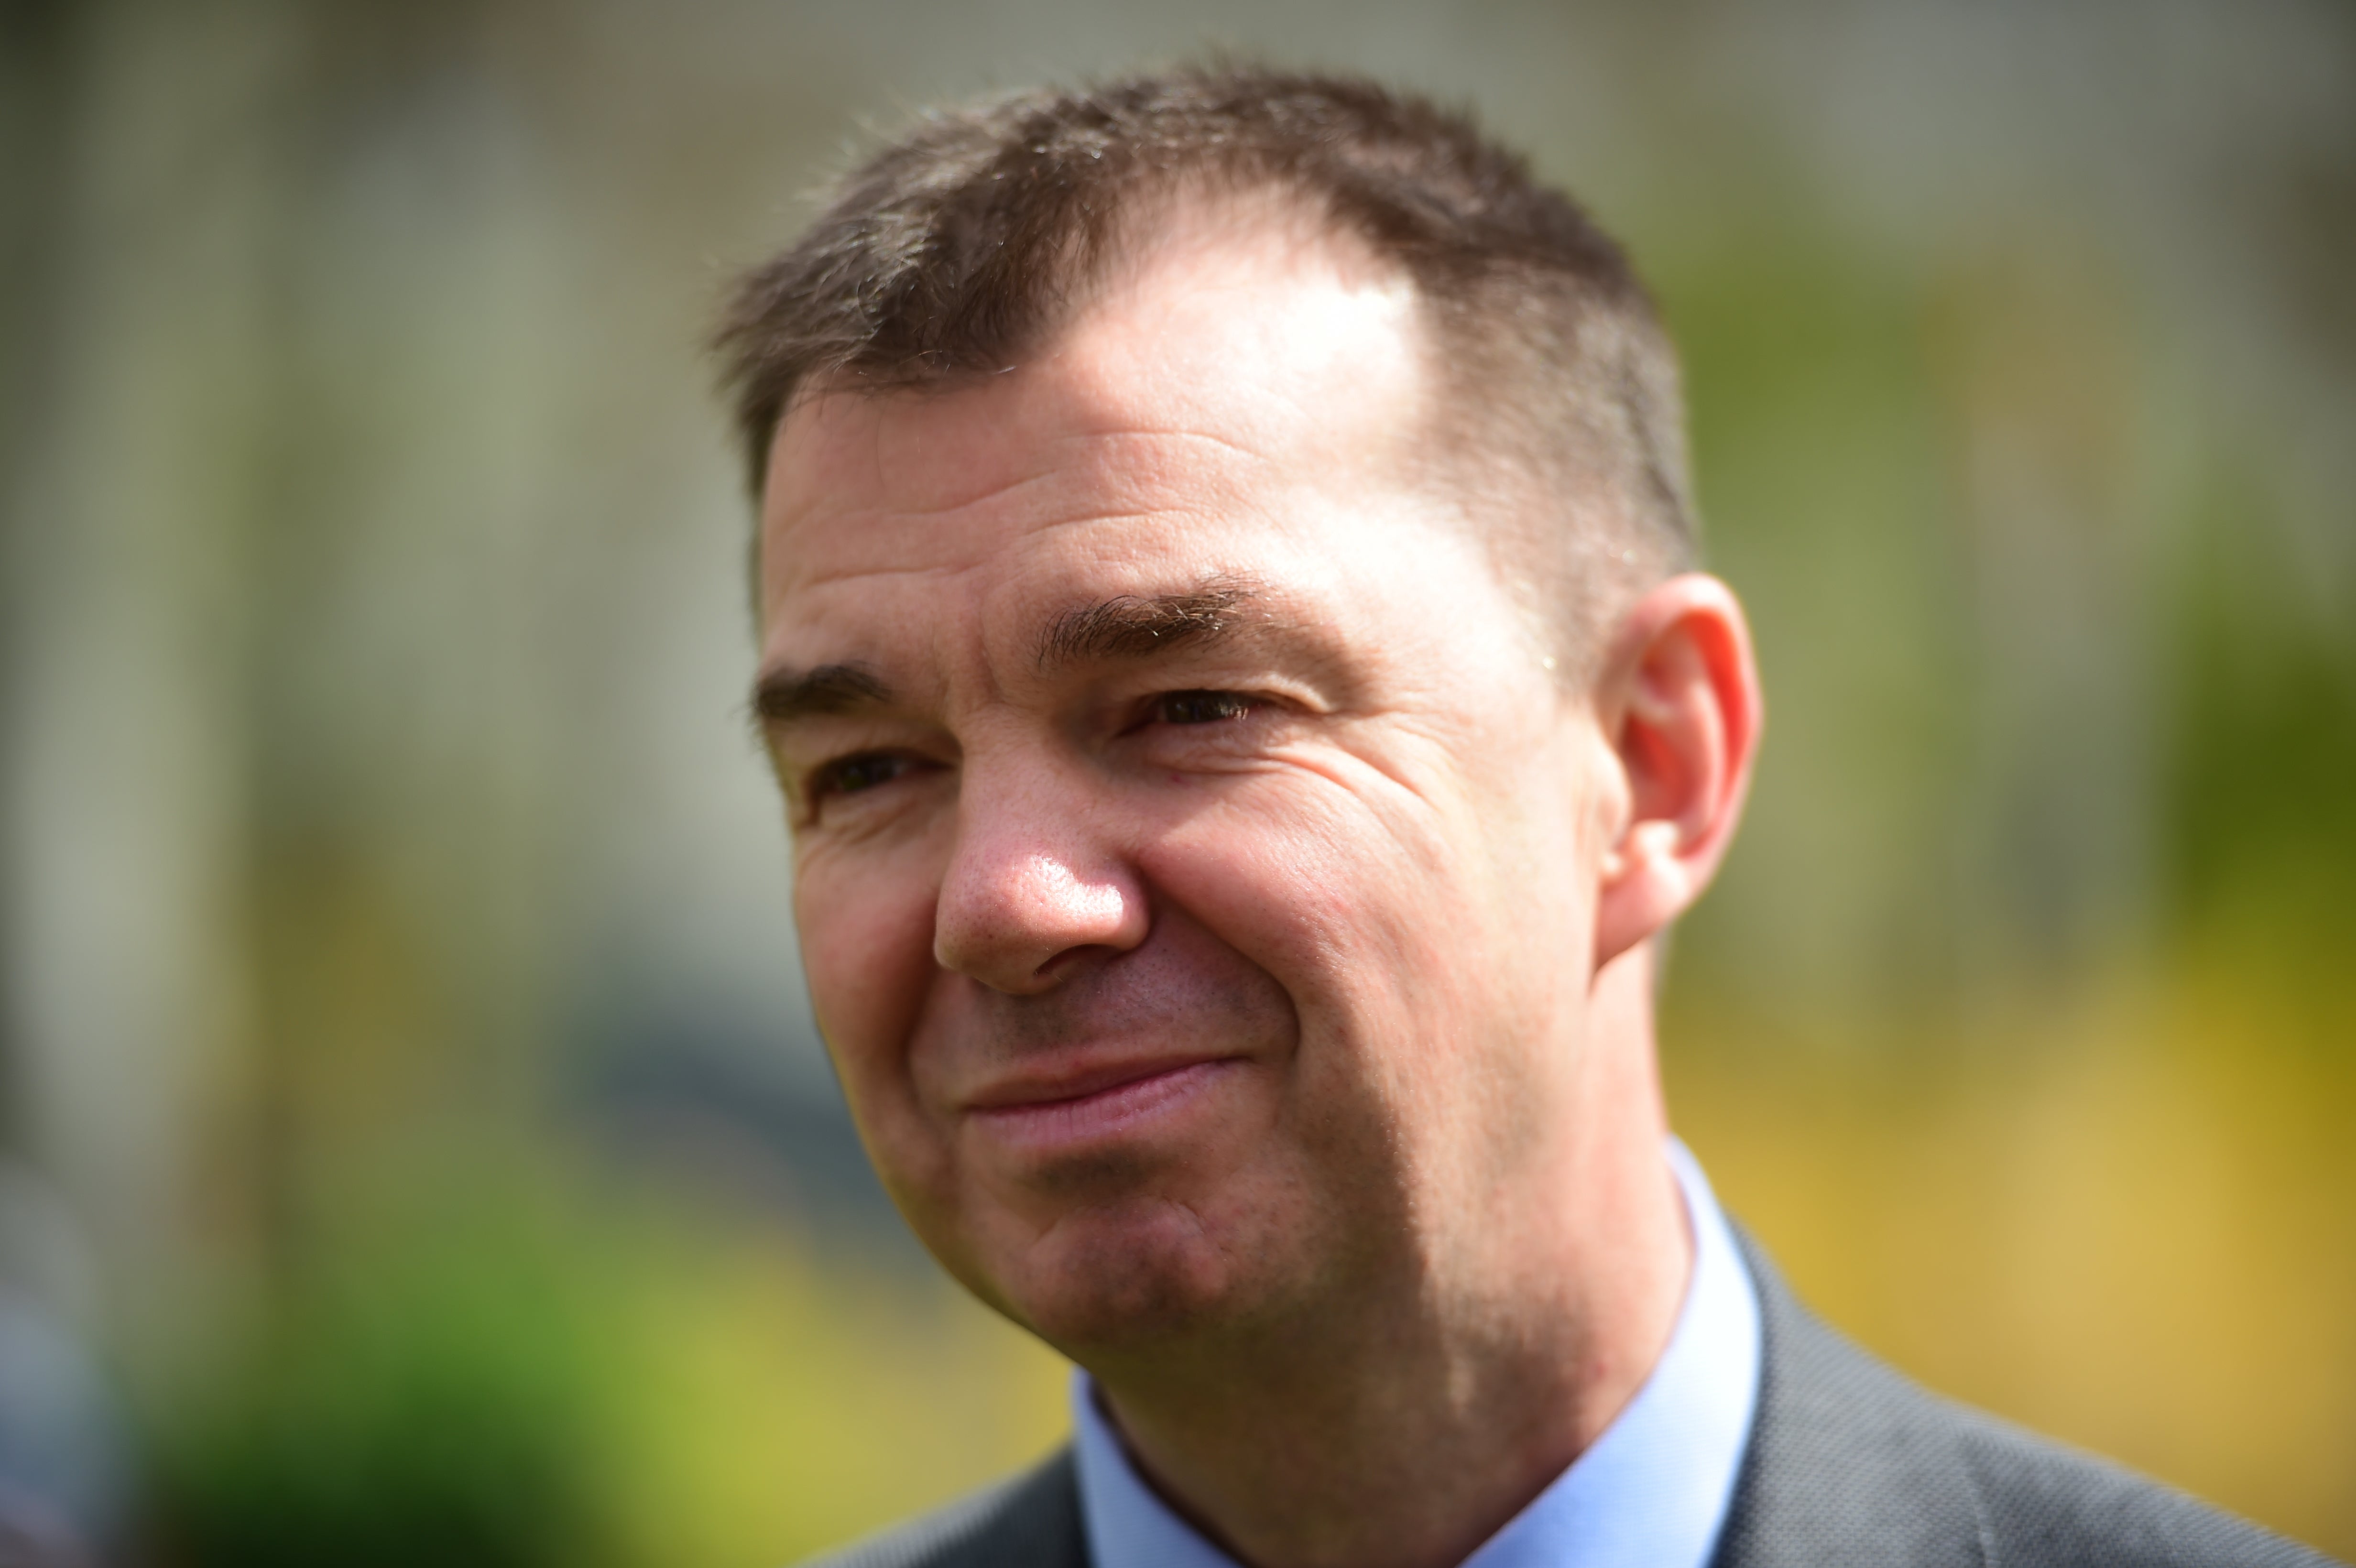 Minister for Pensions Guy Opperman said the new measures will provide better protection for savers (David Mirzoeff/PA)